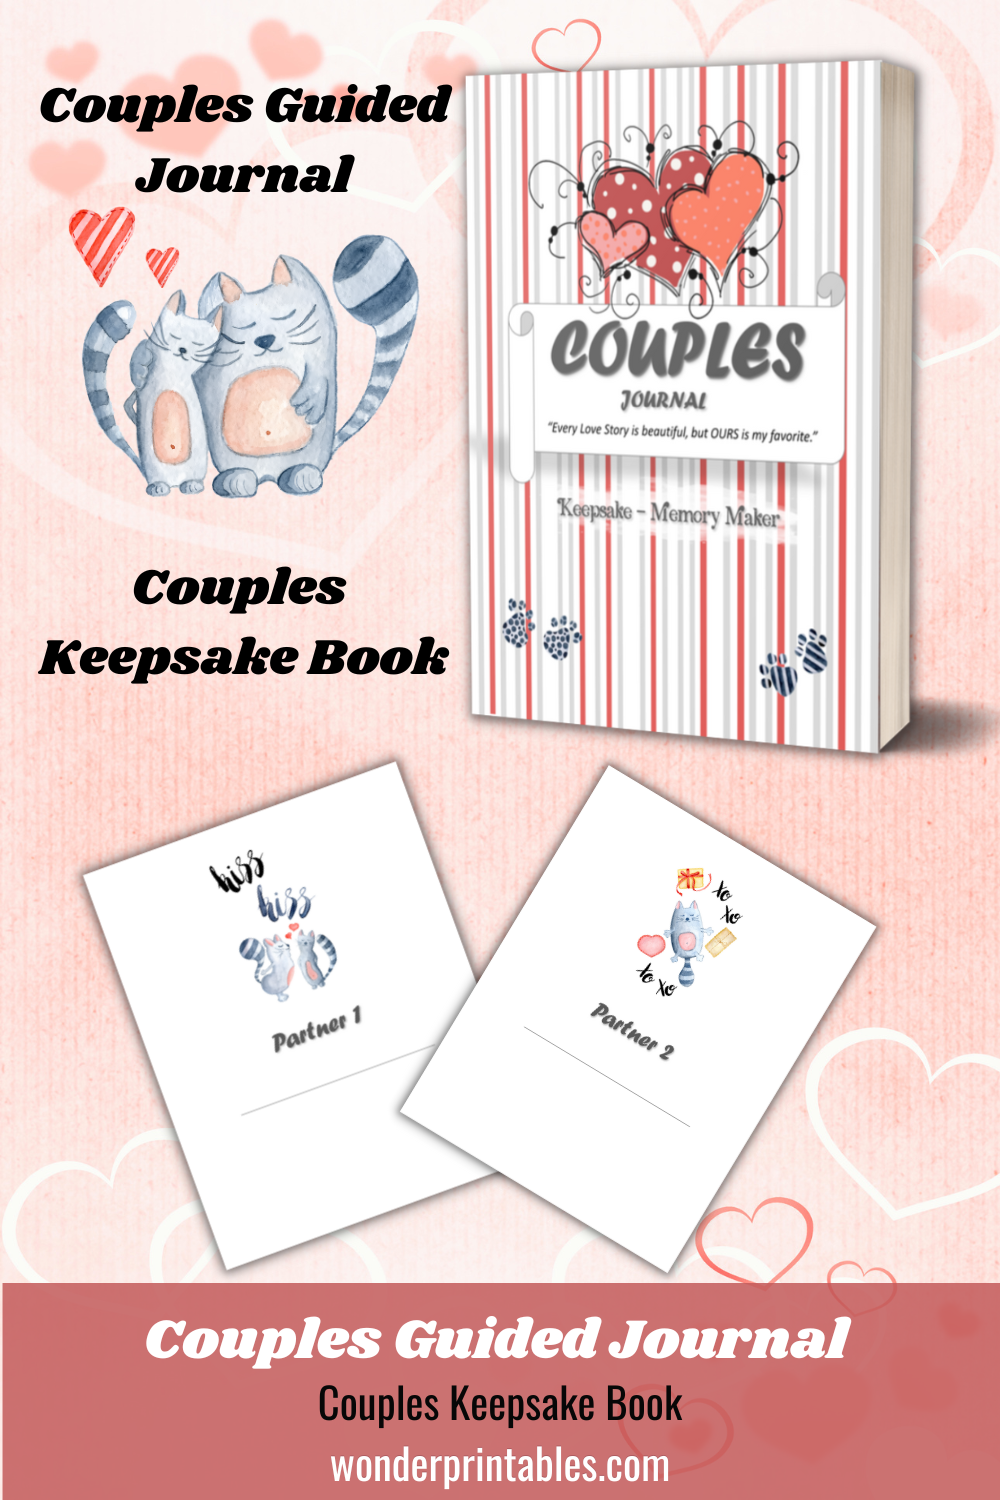 Couples Guided Journal - Printable